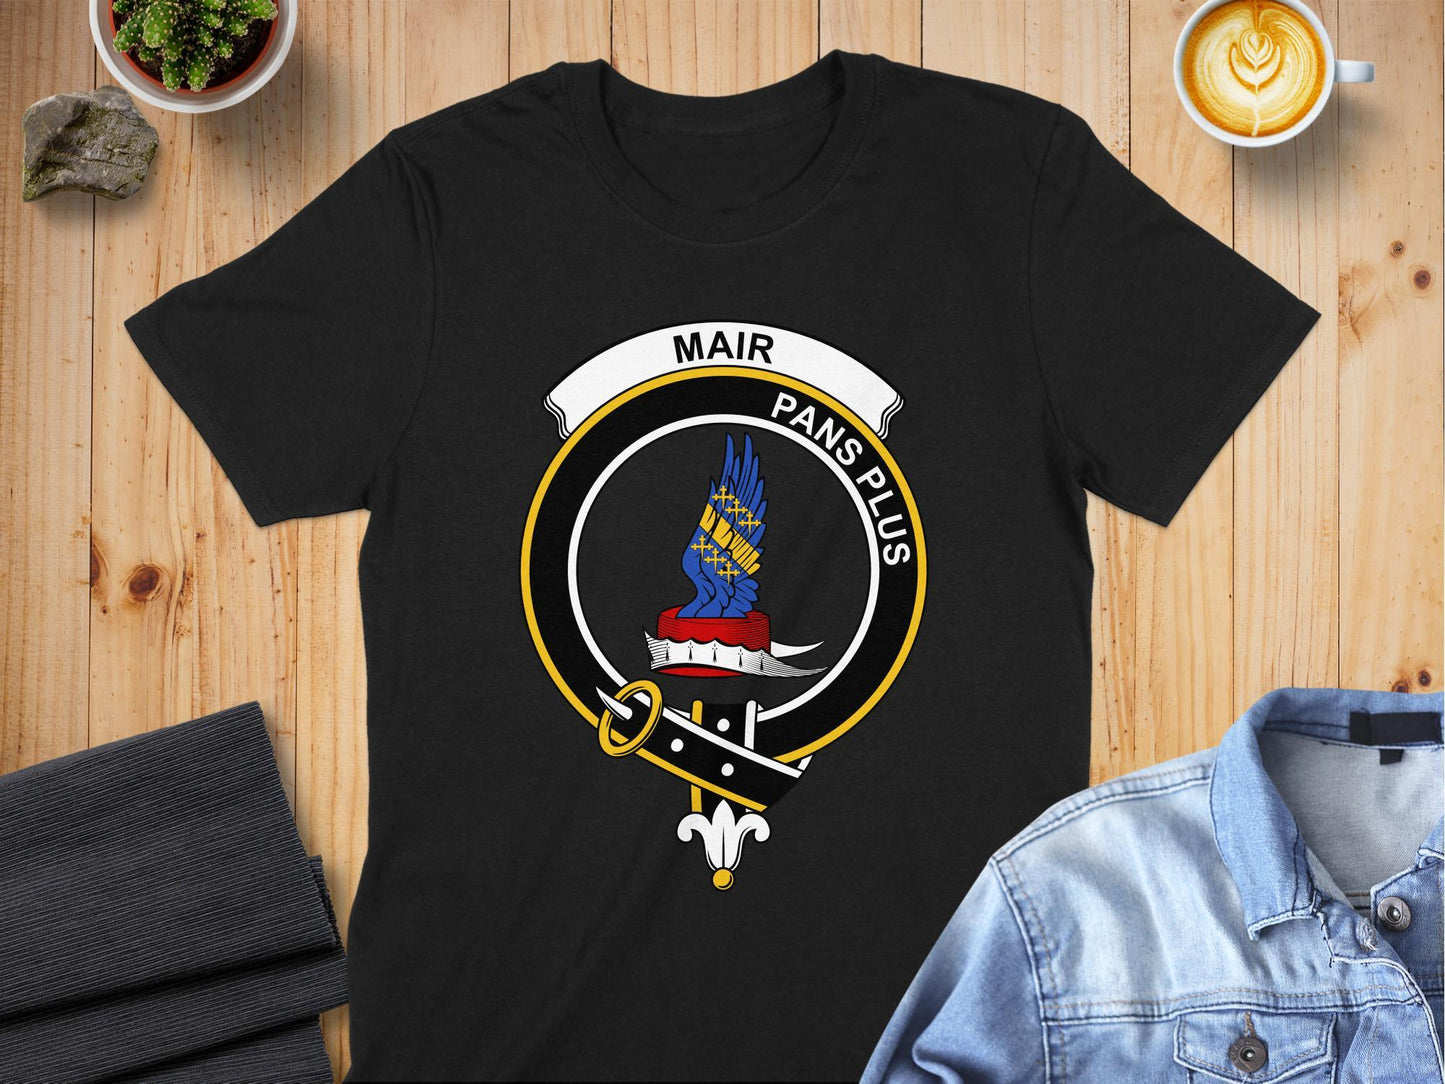 Celebrate Scottish Heritage with Clan Crest T-Shirt - Living Stone Gifts